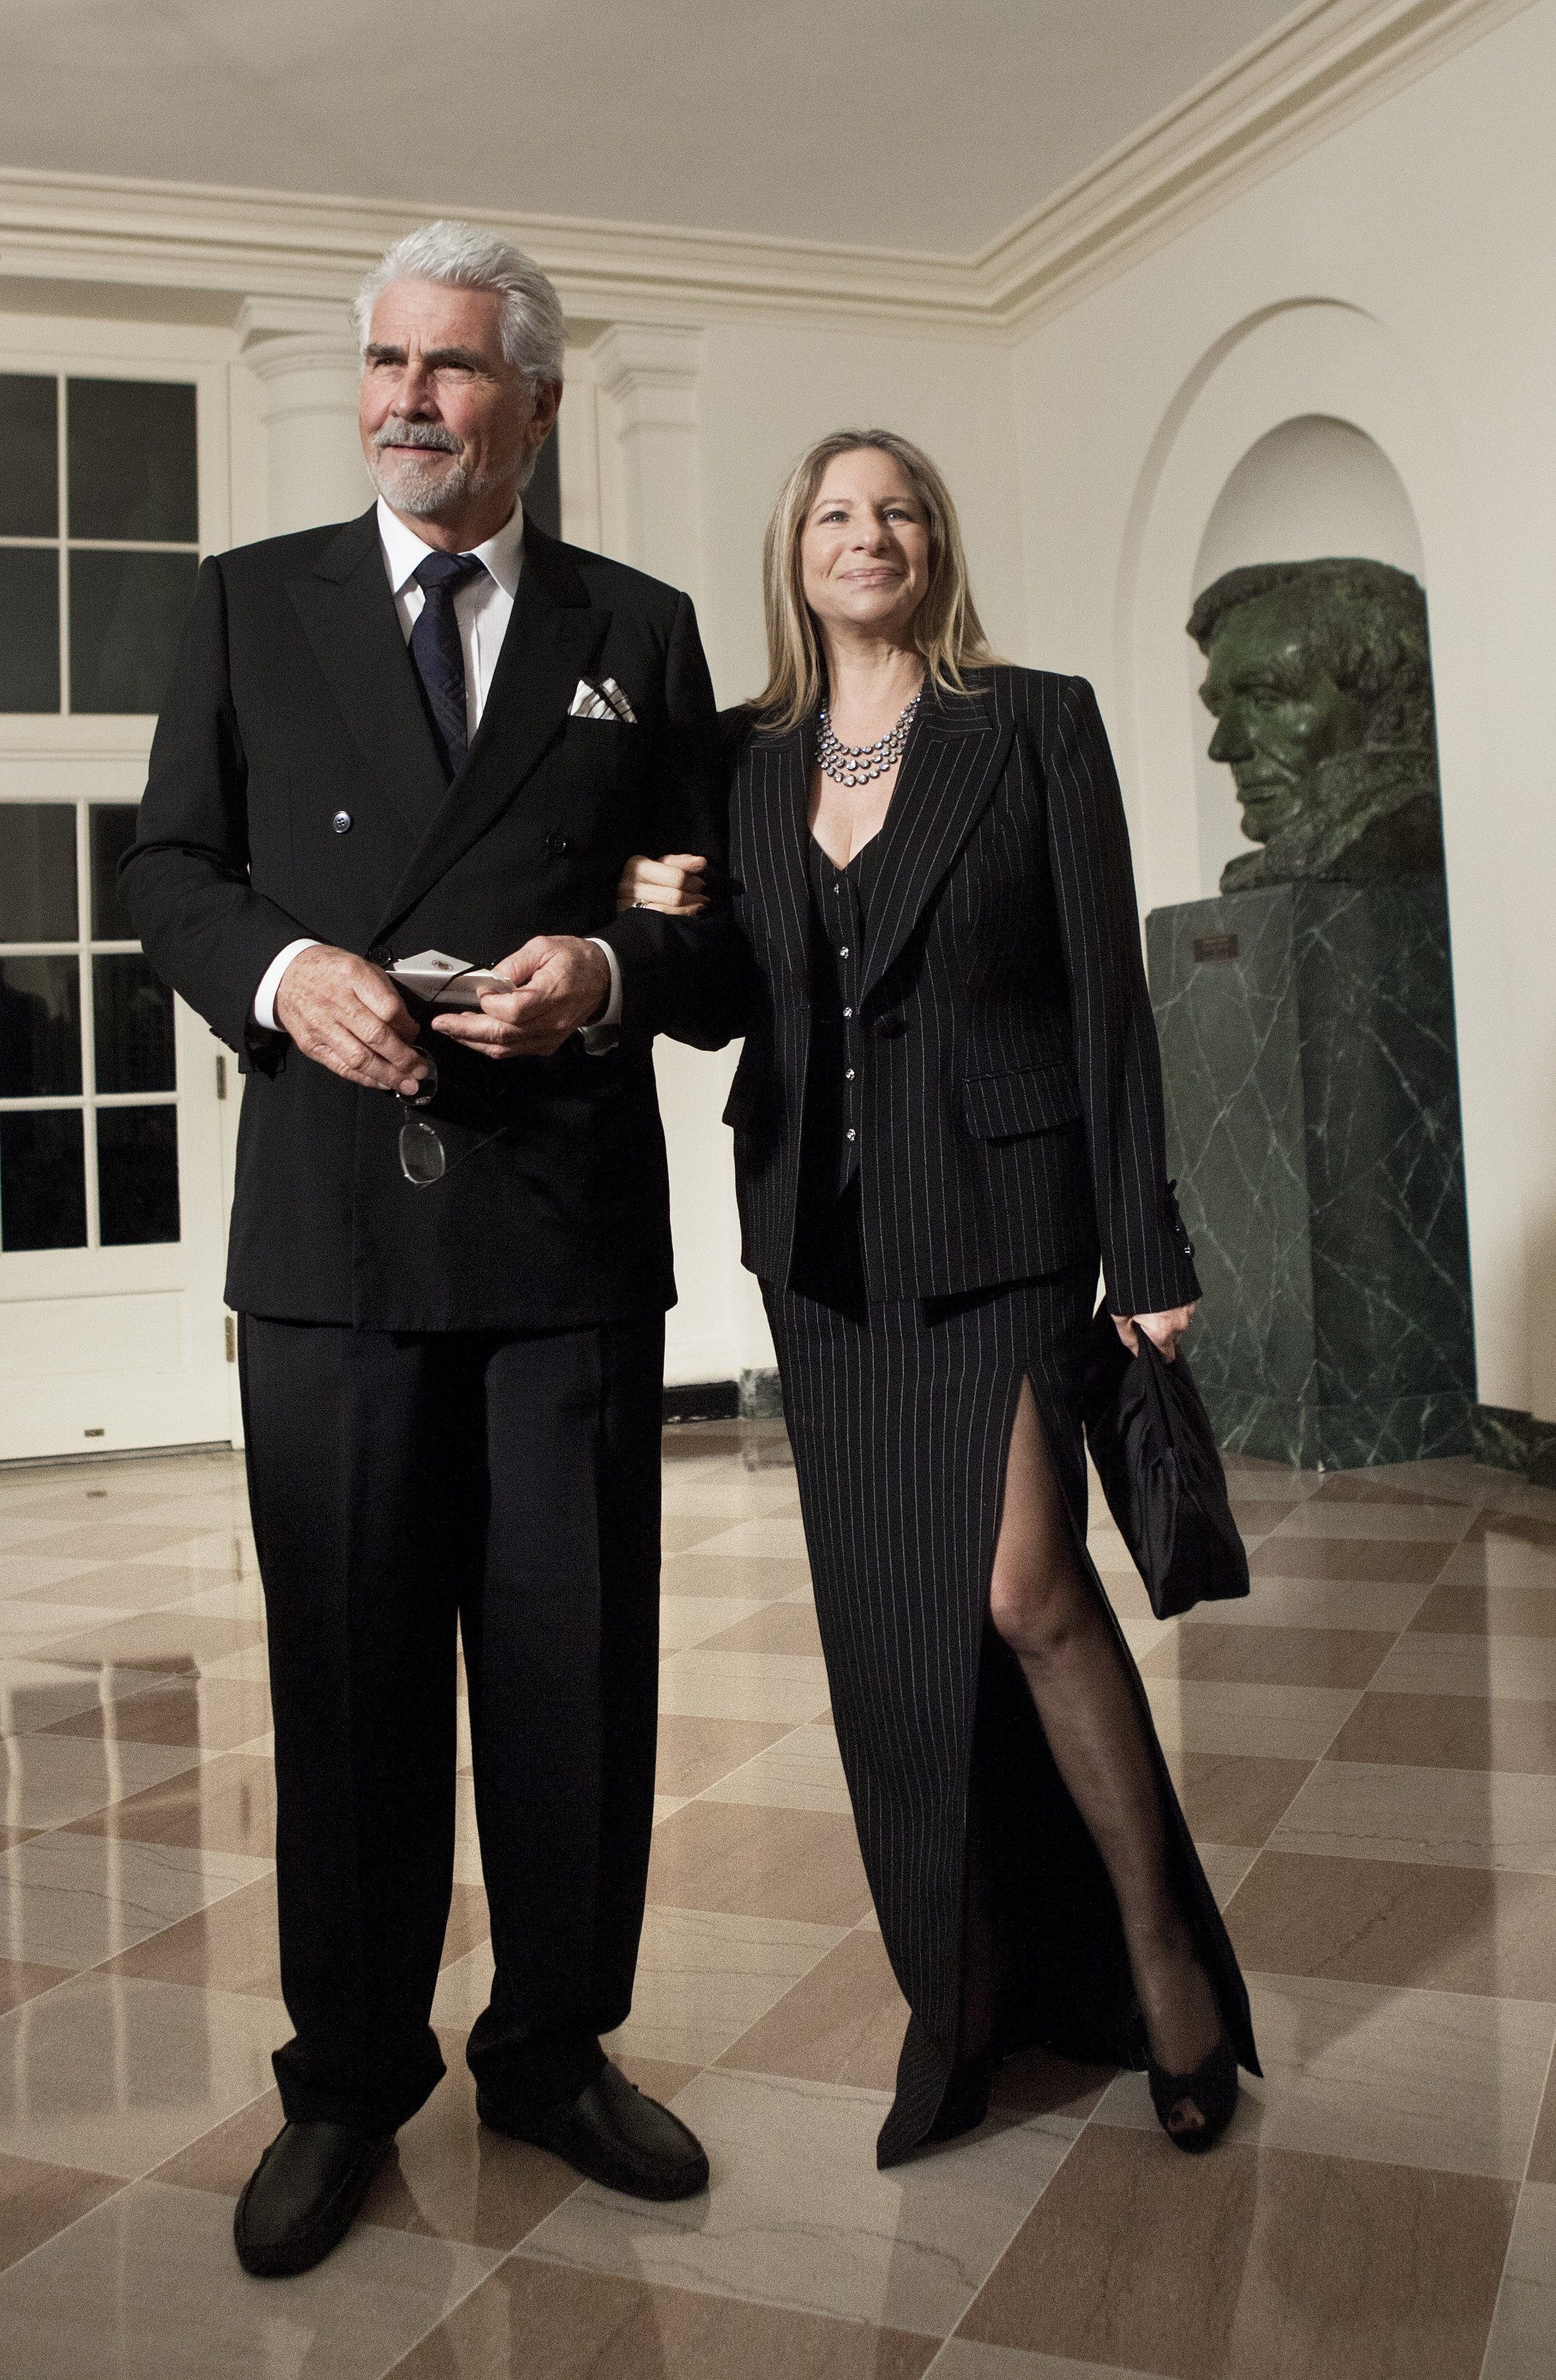 Actor James Brolin (L) and his wife singer Barbra Streisand on January 19, 2011 in Washington DC | Source: Getty Images